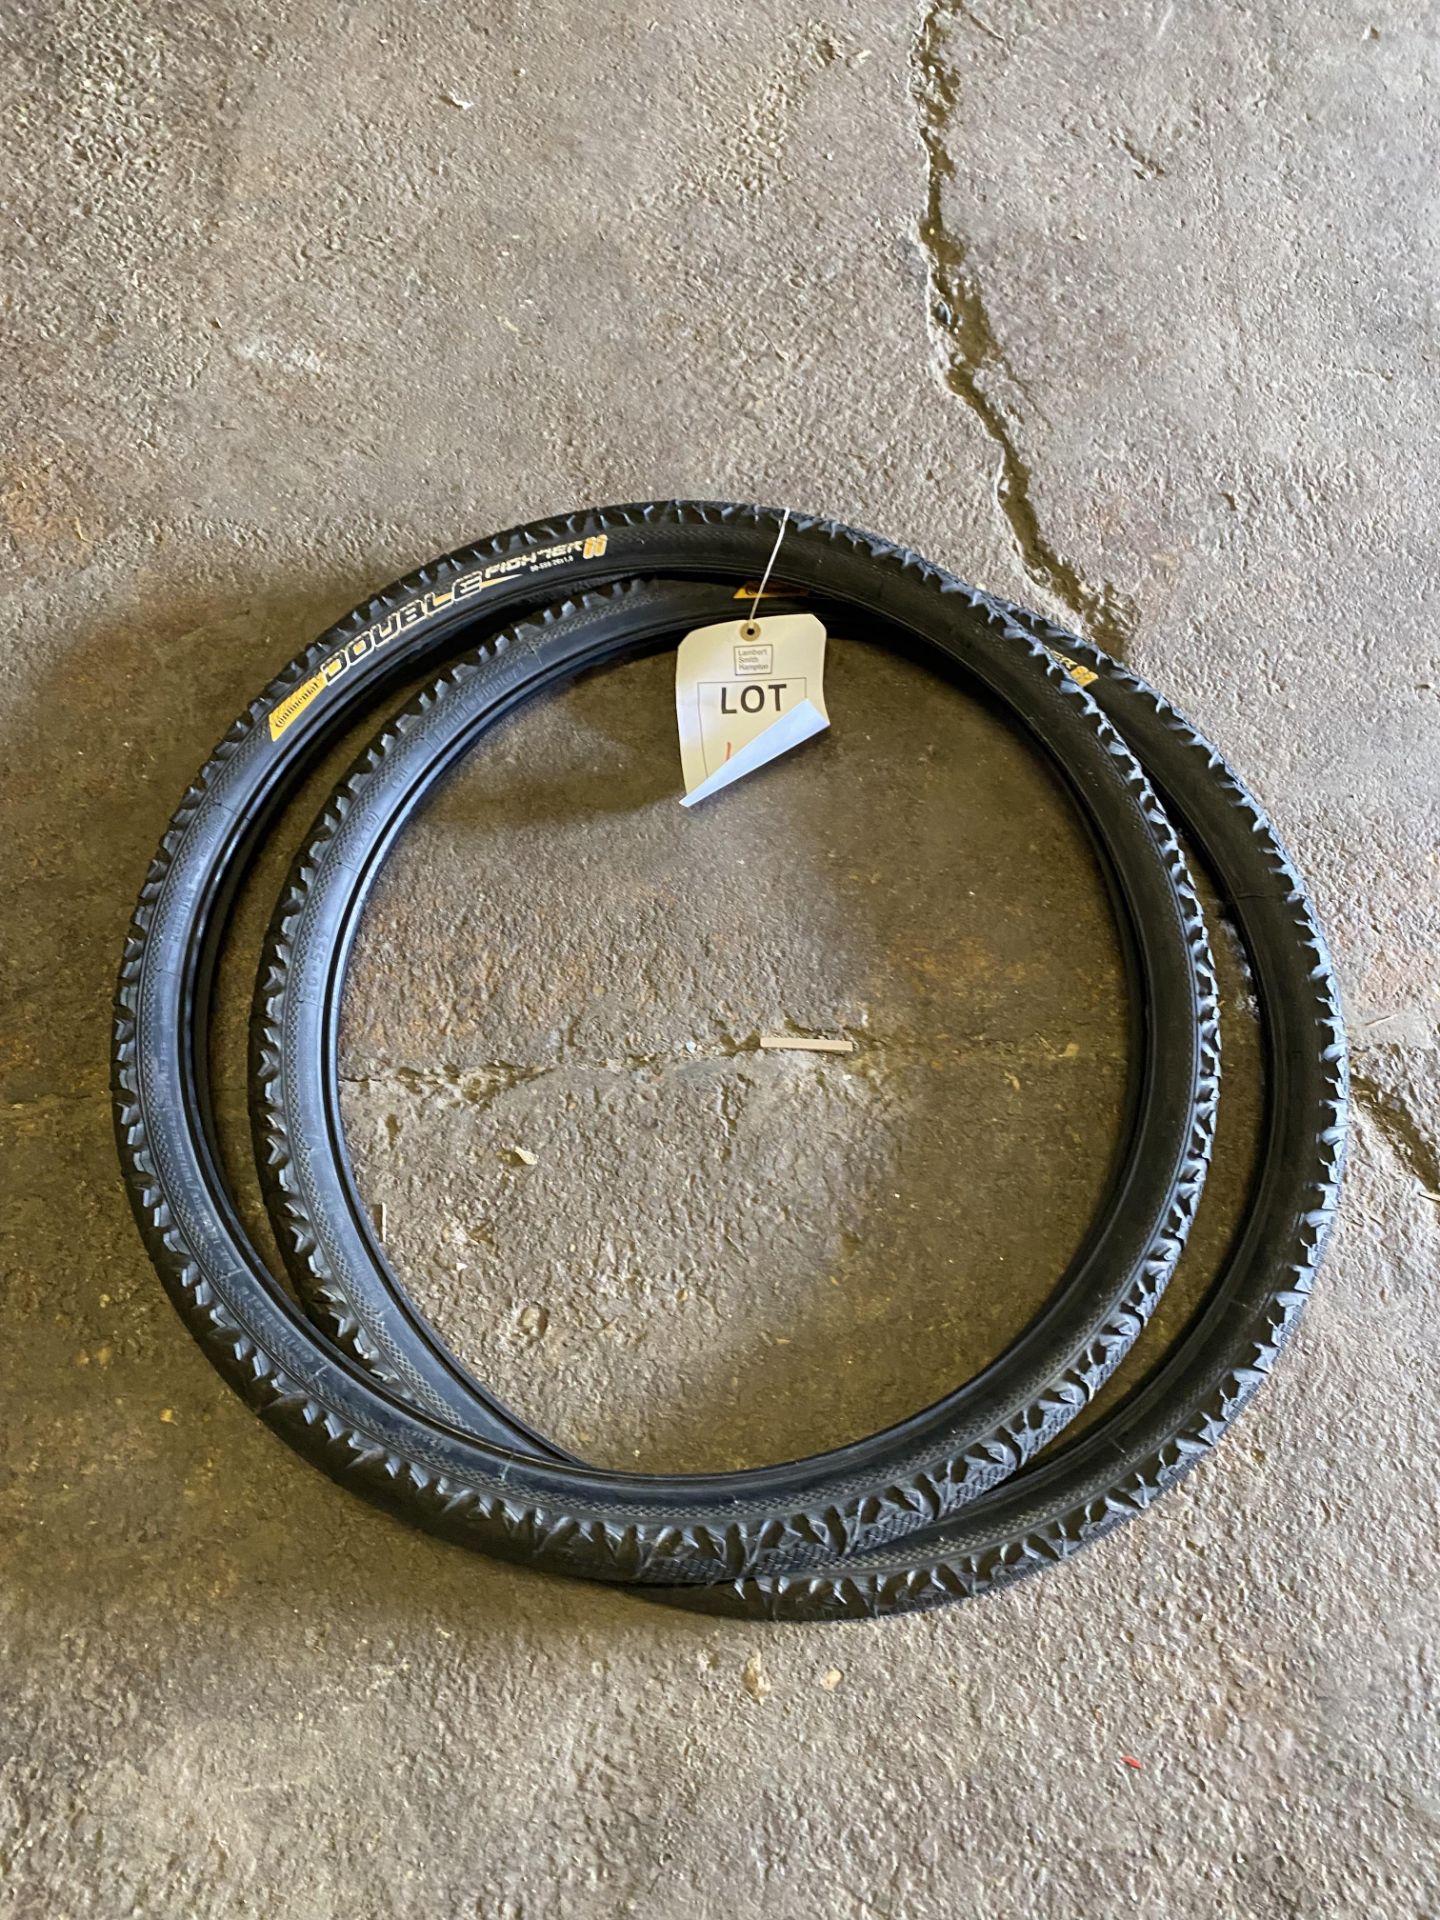 Pair of Continental Double Fighter tyres, 26 x 1.9